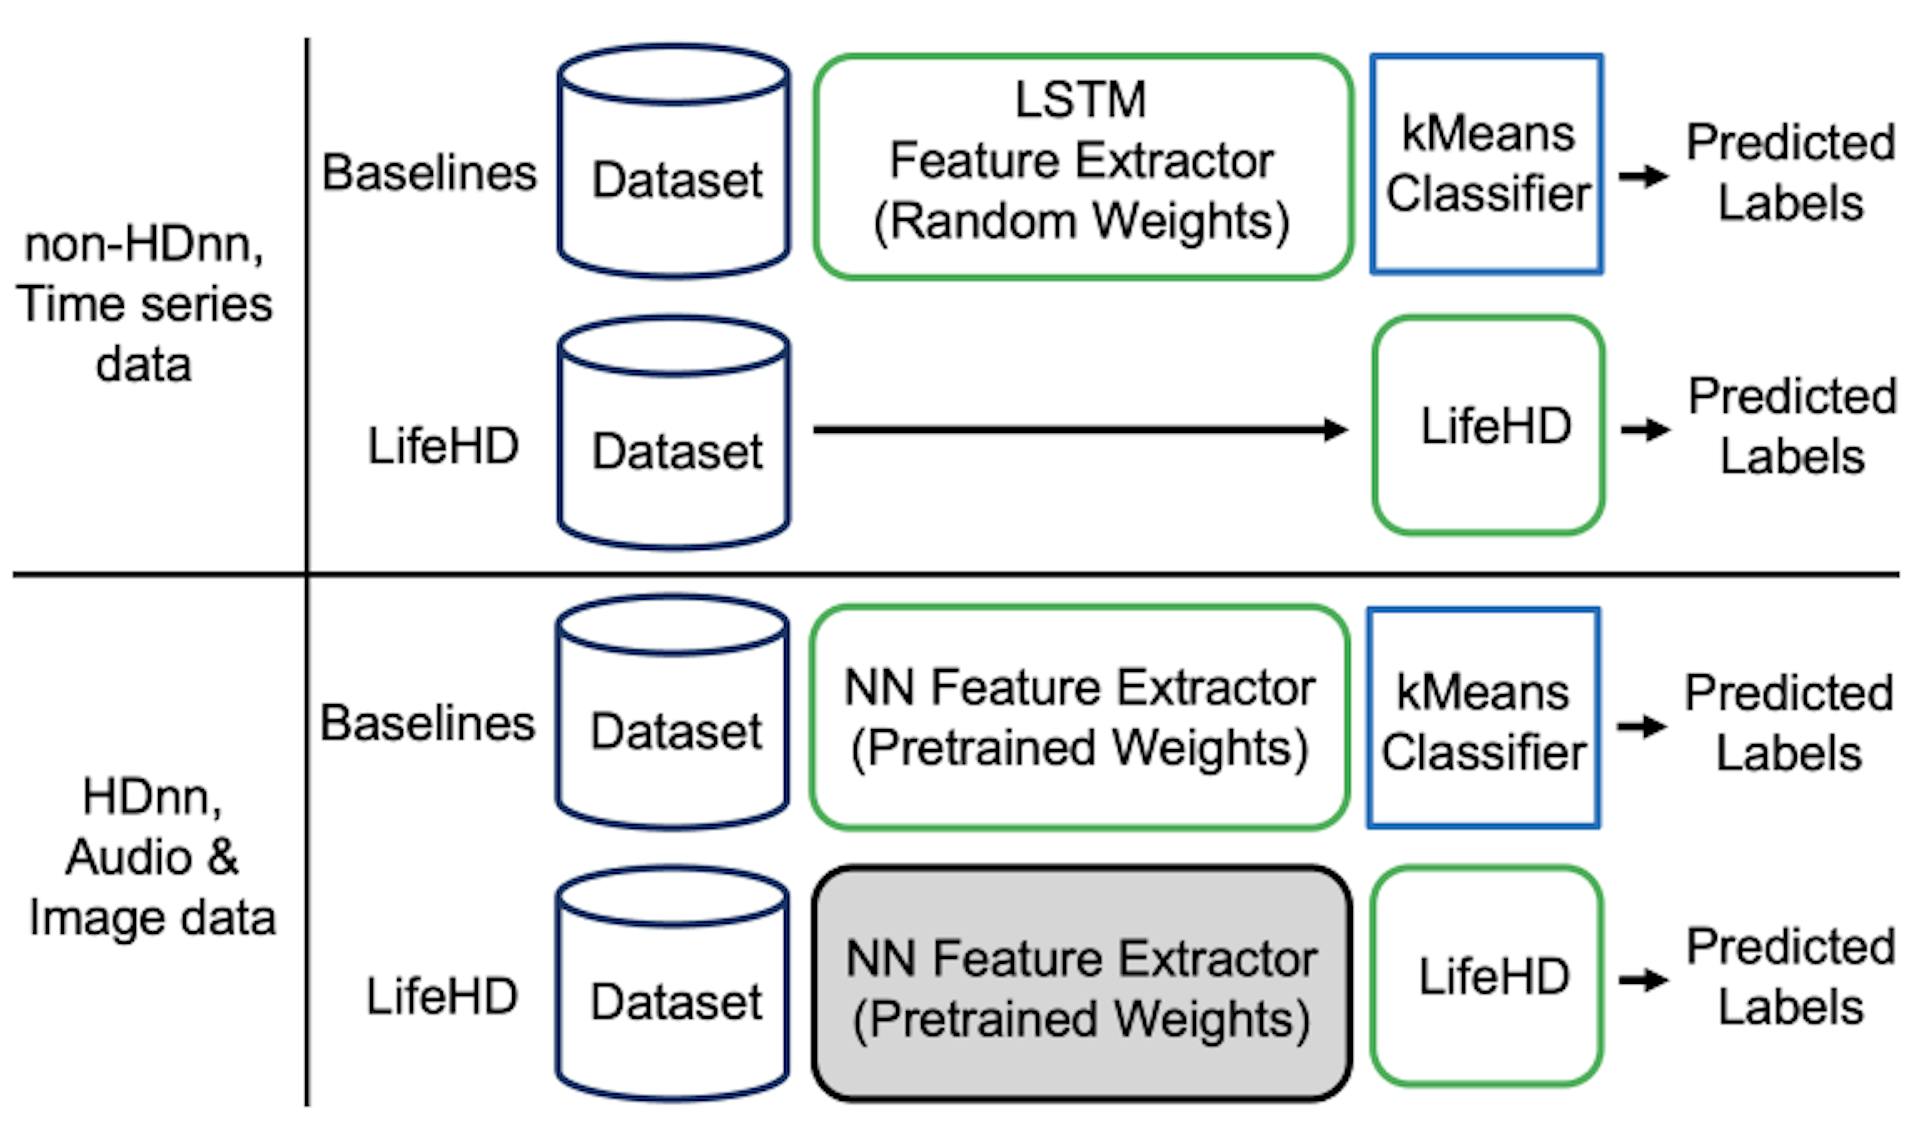 Figure 8: A graphical explanation of the pipeline setup. Green outlines denote the module trained with the streaming data. Blue outlines denote the unsupervised classifier trained during testing. Gray denotes when the module is frozen & not trained further.